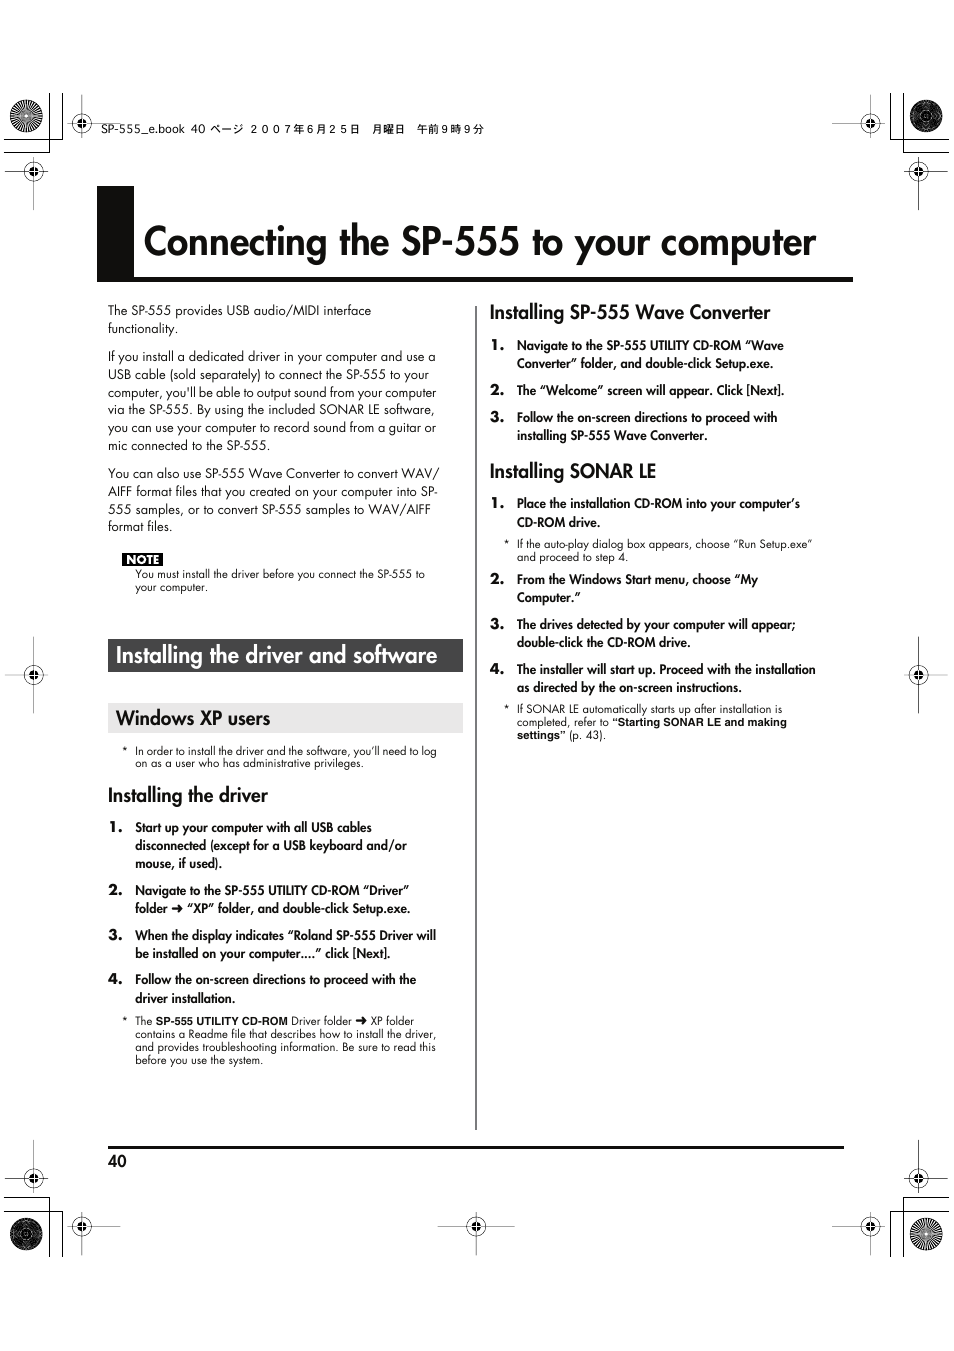 Connecting the sp-555 to your computer, Installing the driver and software, Windows xp users | P. 40), Installing the driver, Installing sp-555 wave converter, Installing sonar le | Roland SP-555 User Manual | Page 40 / 80